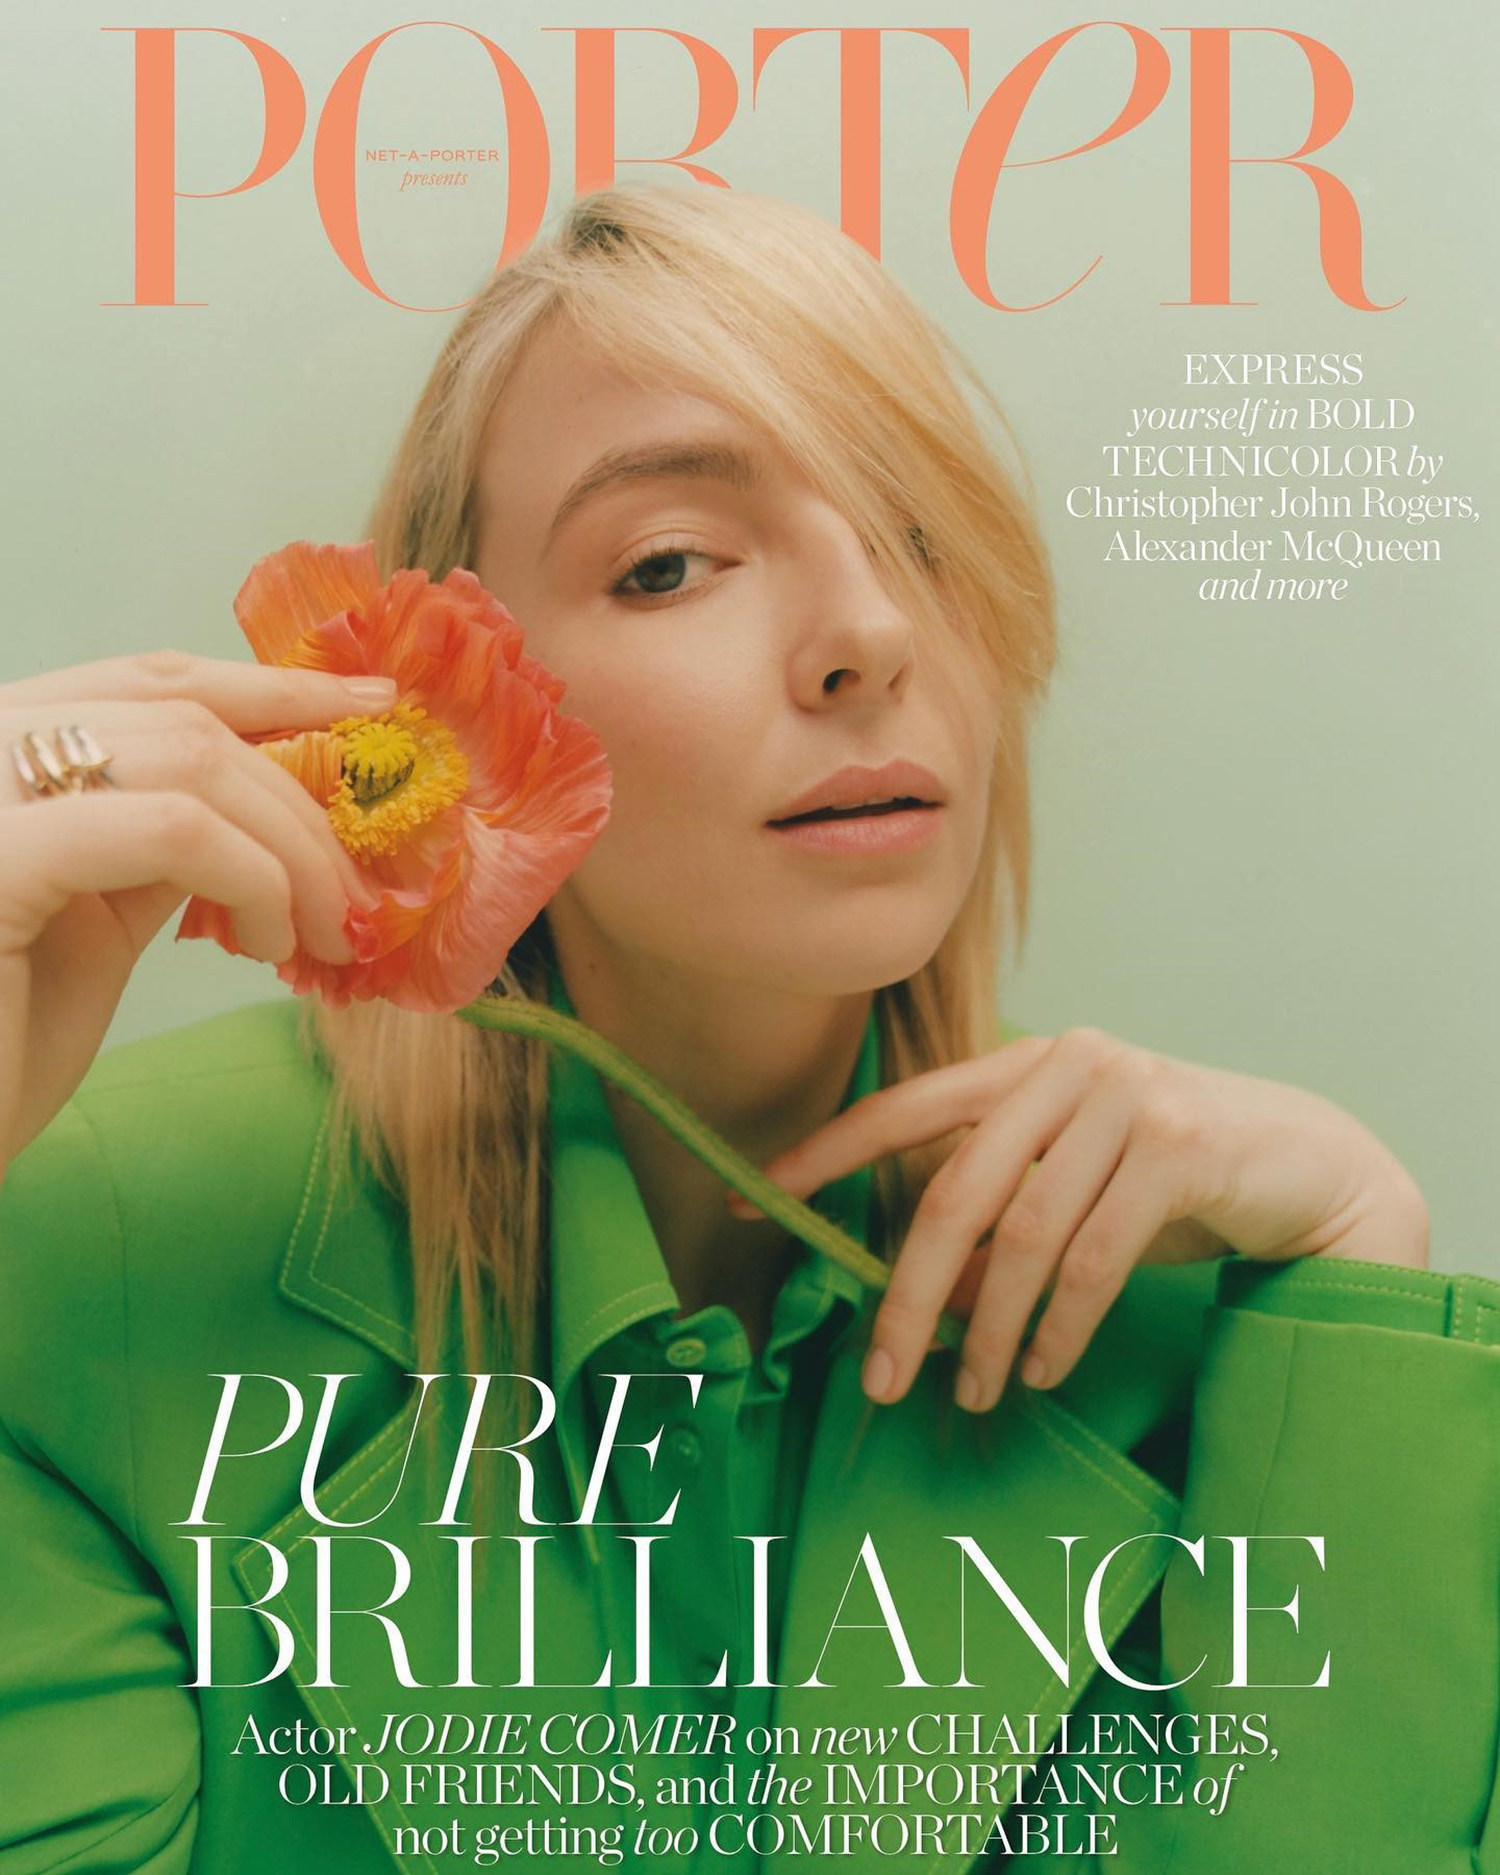 Jodie Comer covers Porter Magazine March 7th, 2022 by Laura McCluskey